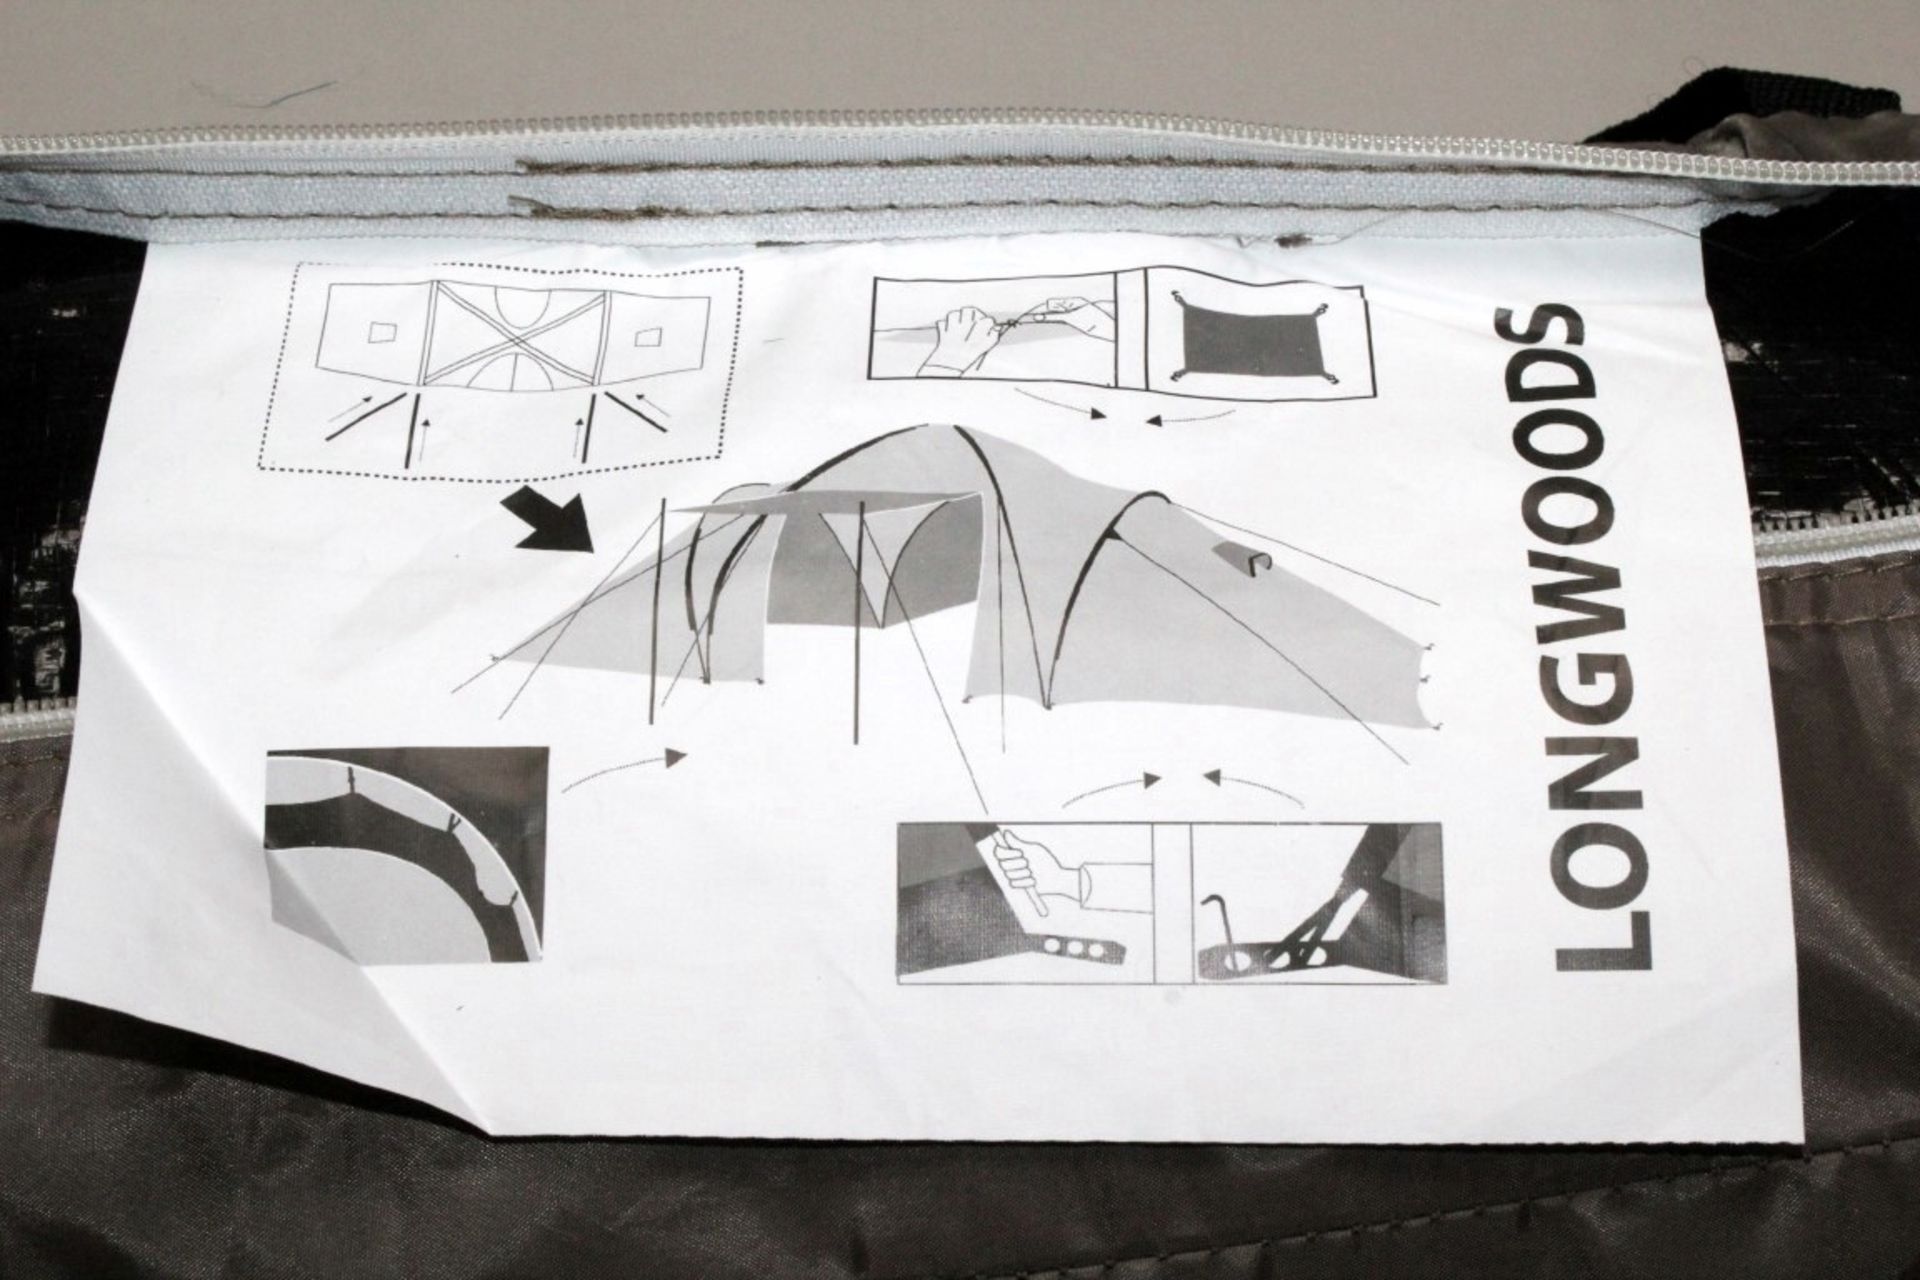 1 x Redcliffs Longwood Large 4-Man Family Tent - Colour: Brown - 2 Room / 2 Entrances -  Brand New - Image 5 of 6